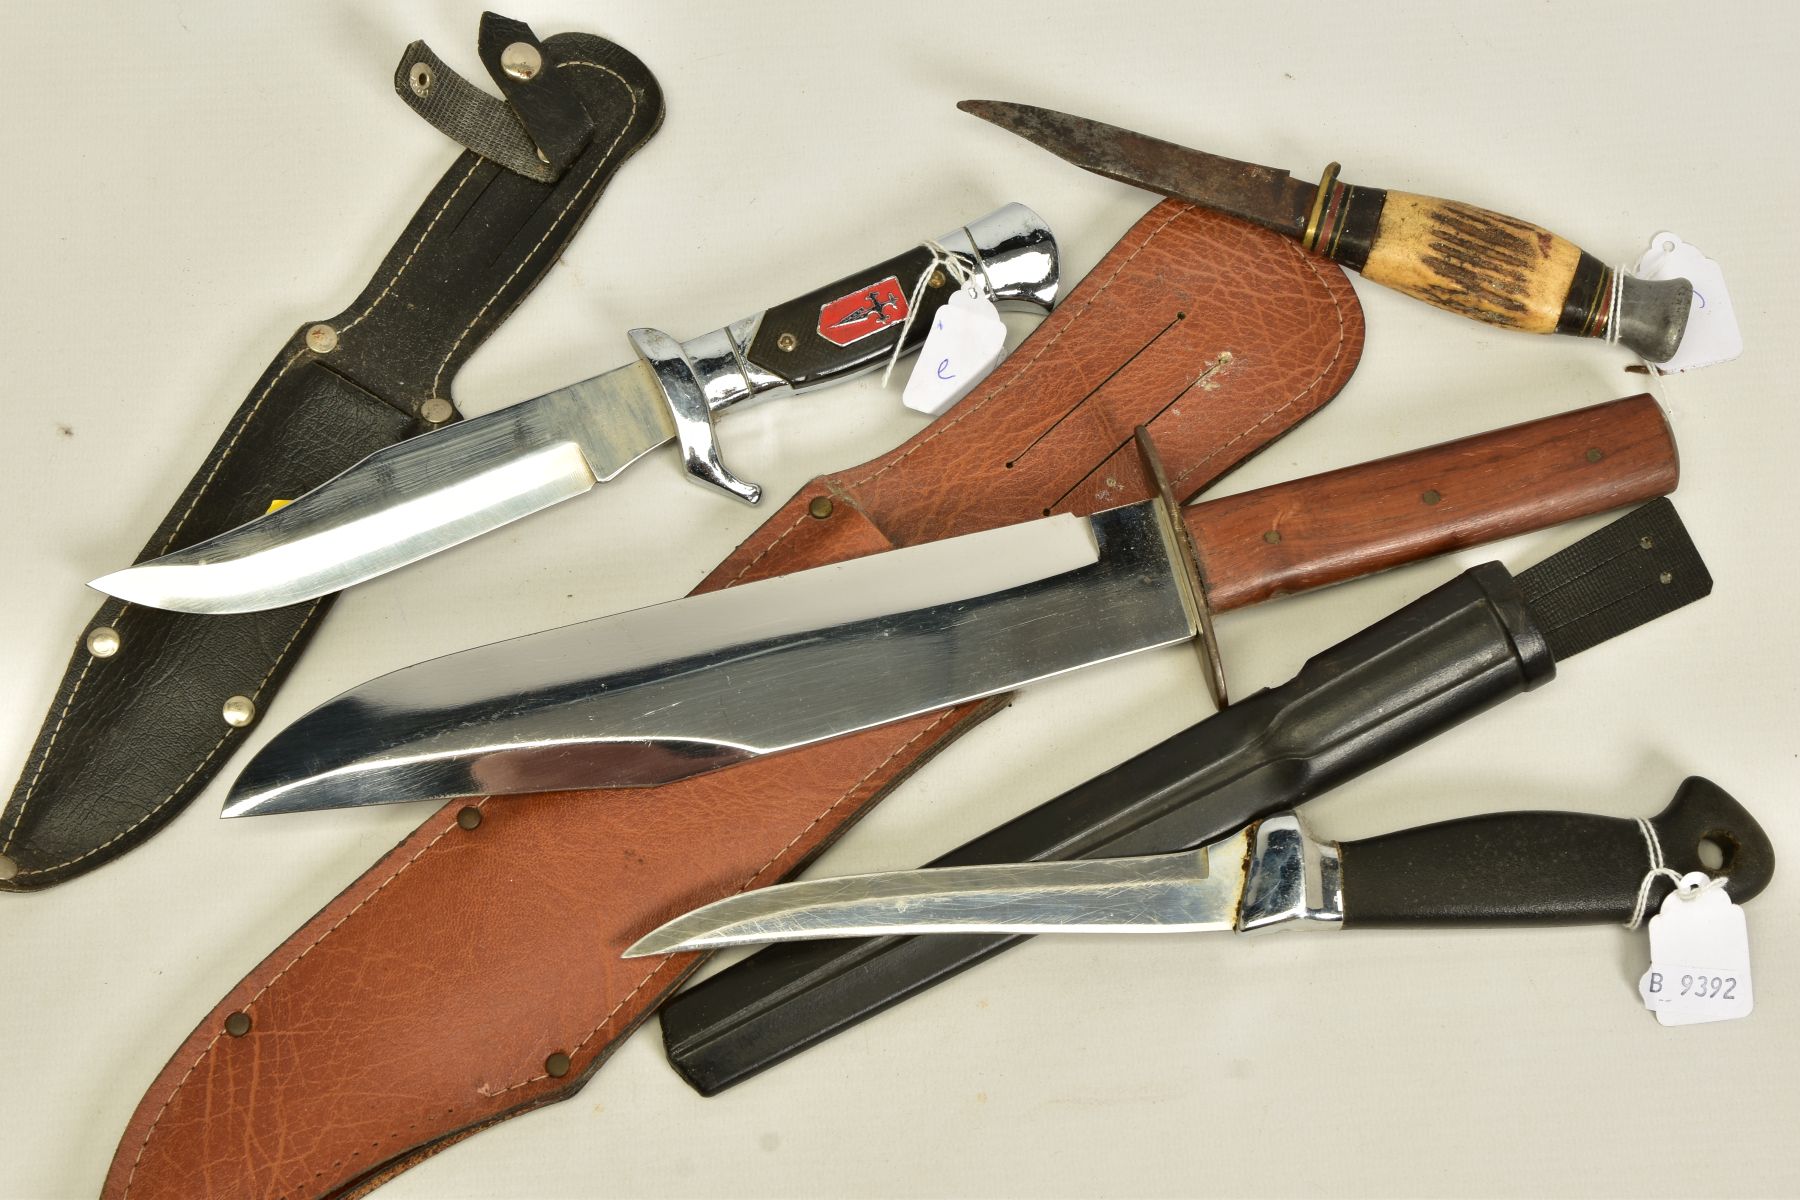 FOUR x MODERN KNIVES/DAGGERS, one is a Bowie knife style, three have scabbards, camping/hunting - Image 5 of 5